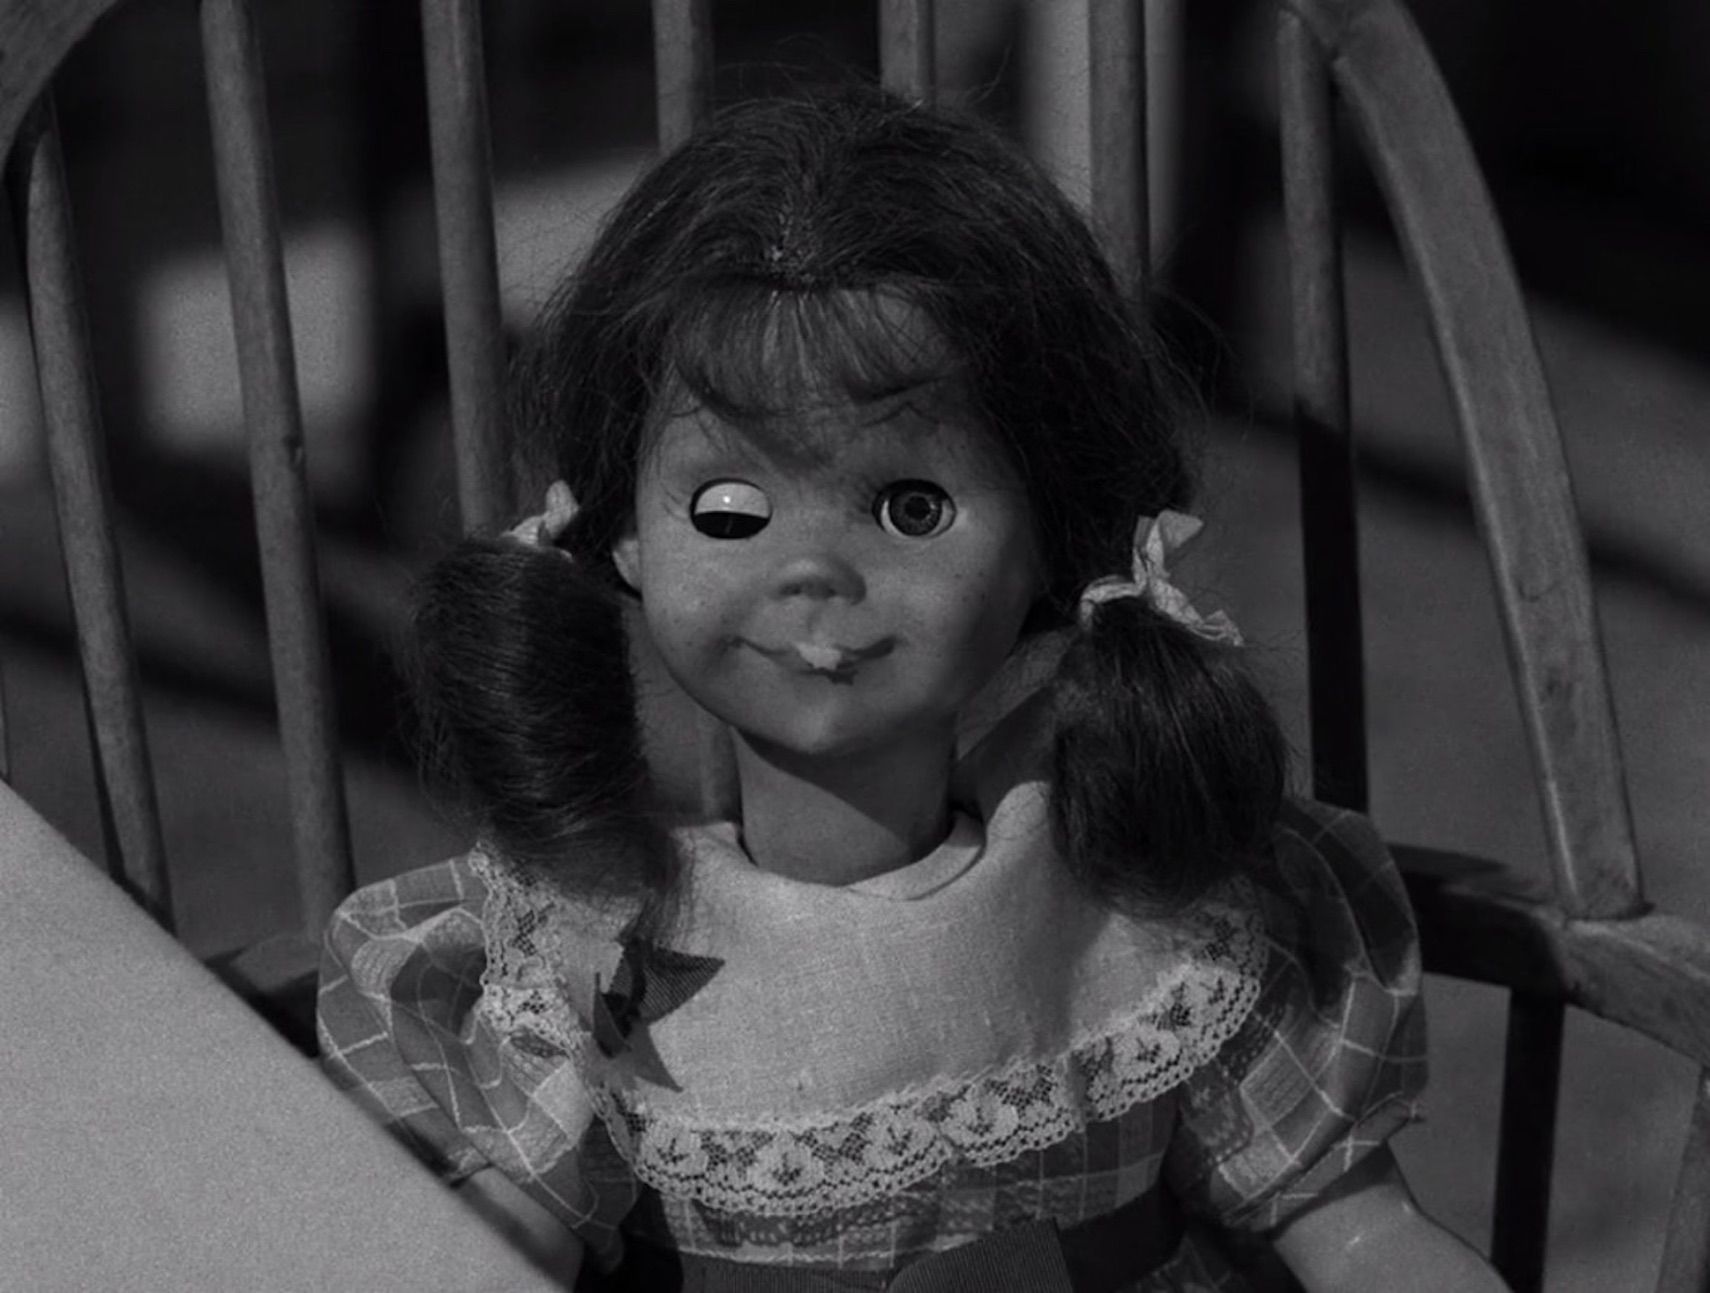 10 Scariest Killer Dolls In Movies Ranked